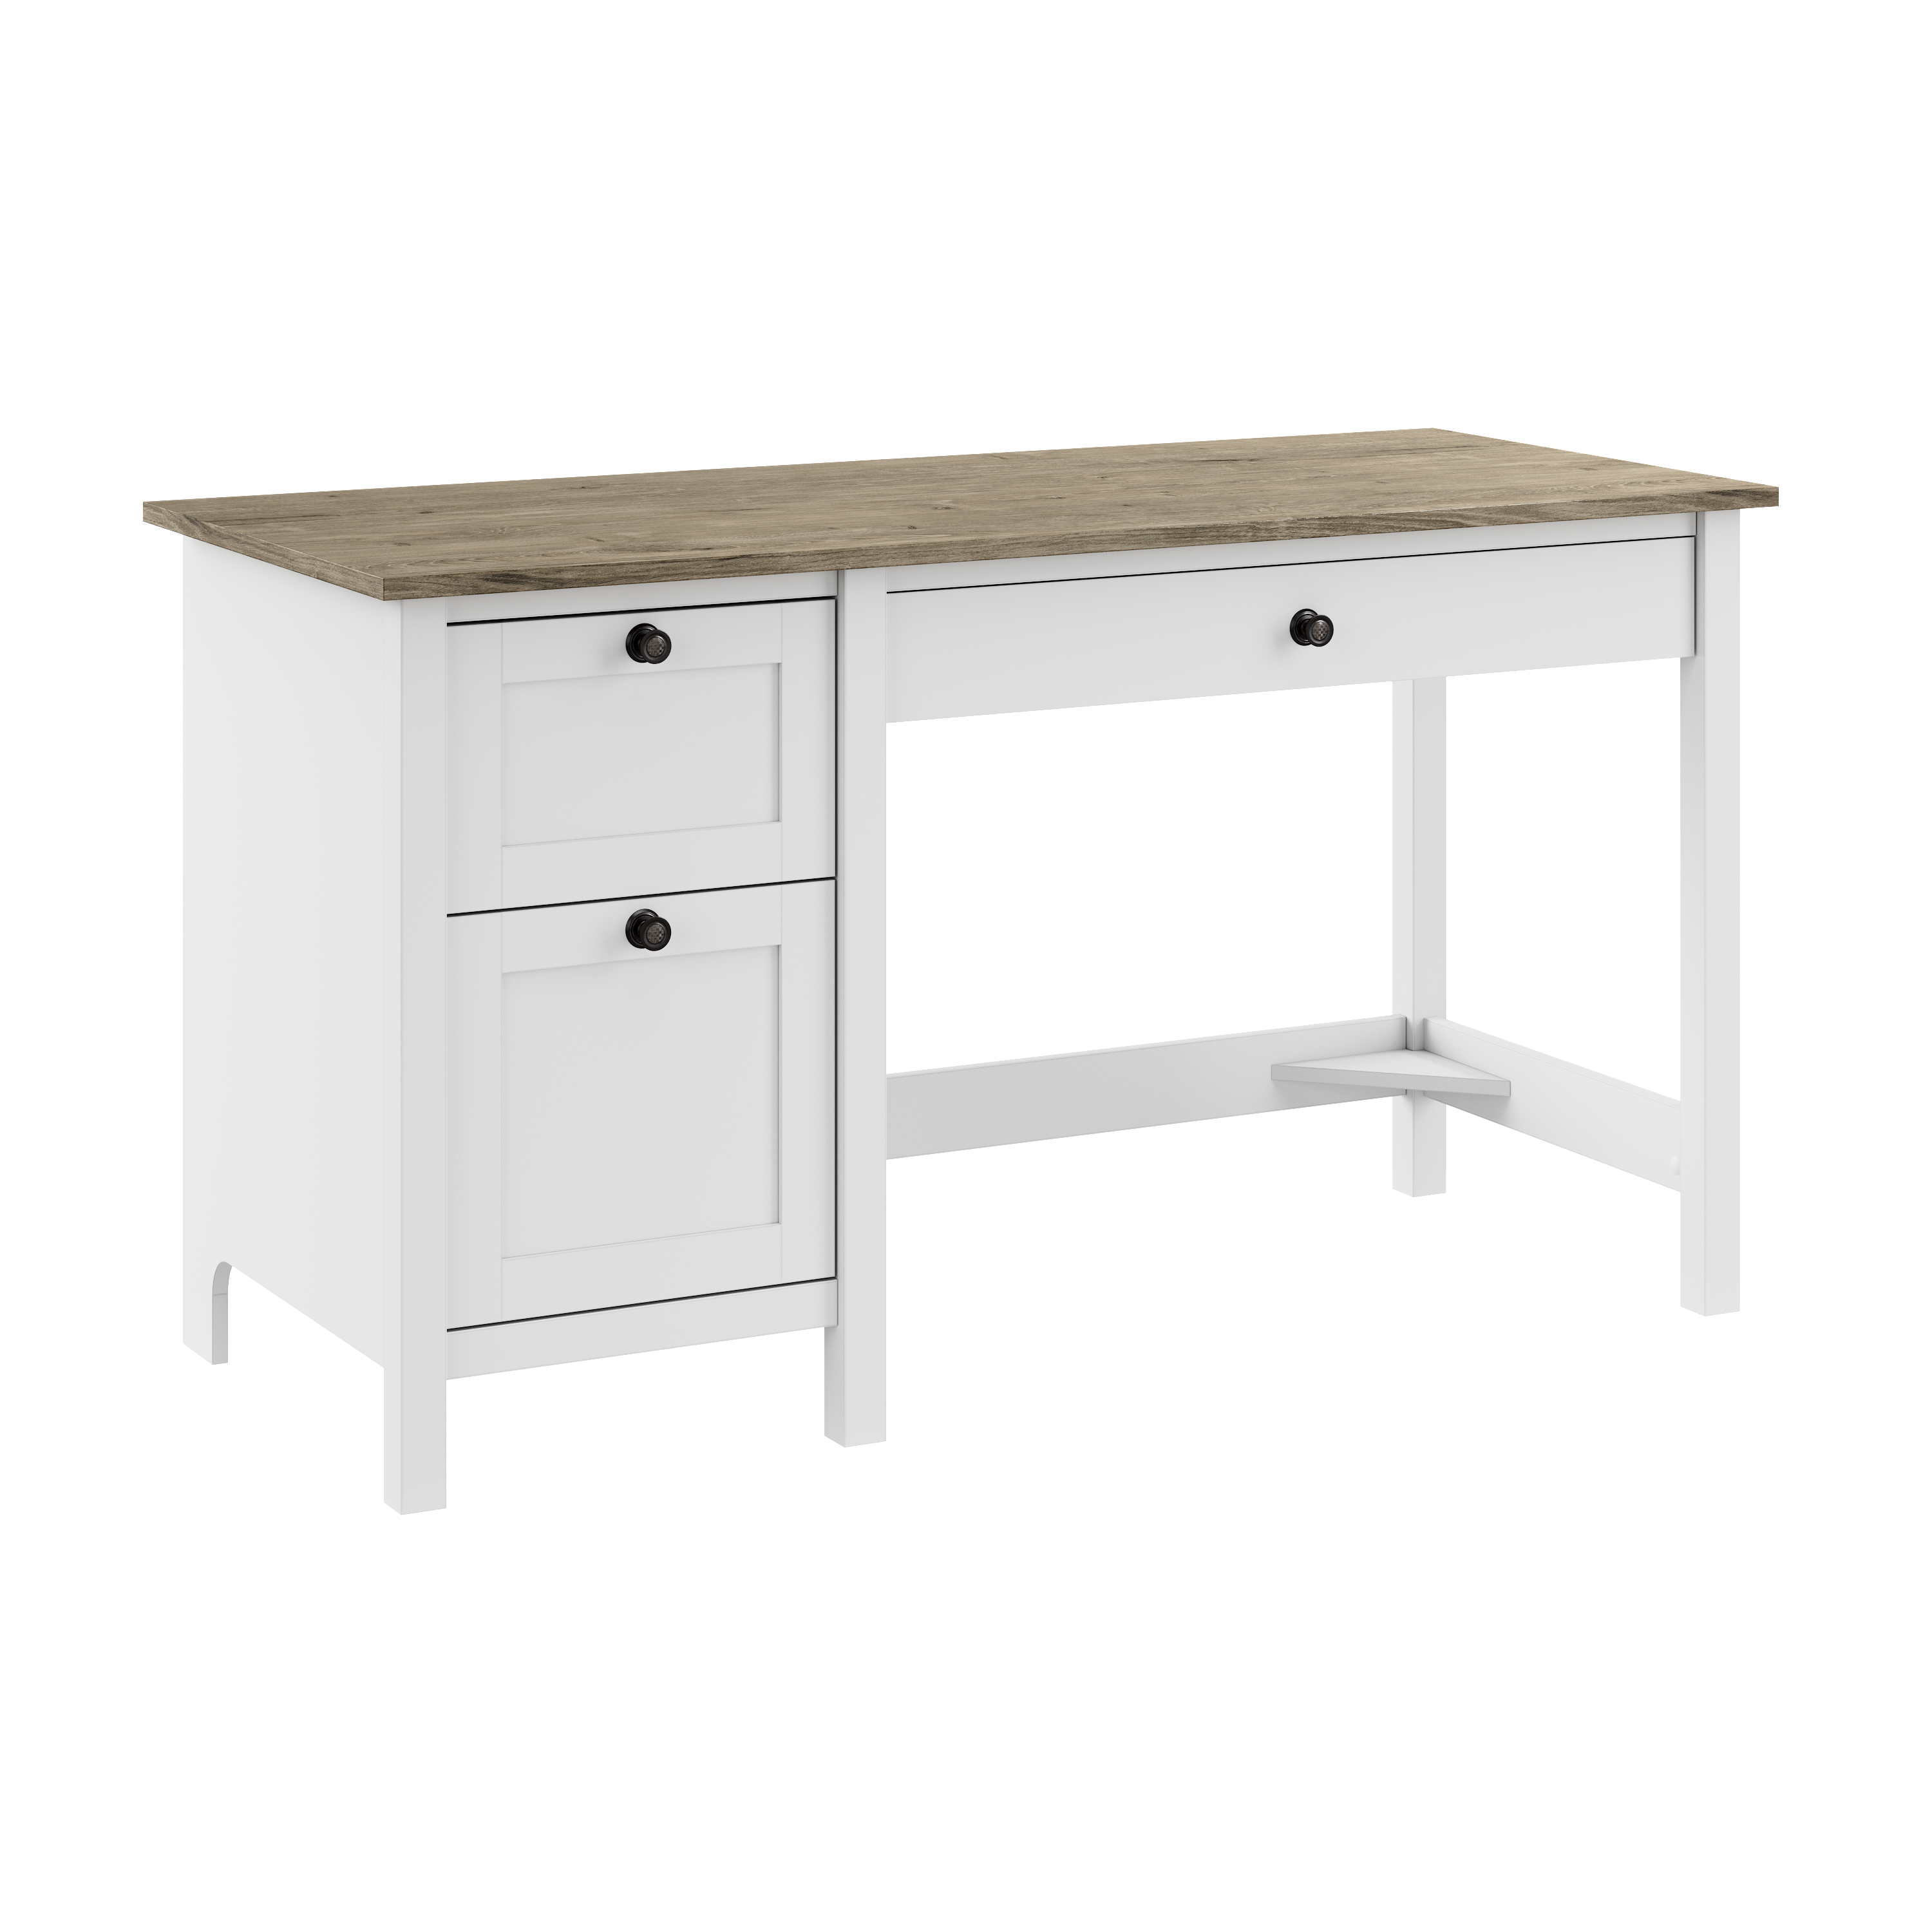 Shop Bush Furniture Mayfield 54W Computer Desk with Drawers 02 MAD254GW2-03 #color_shiplap gray/pure white